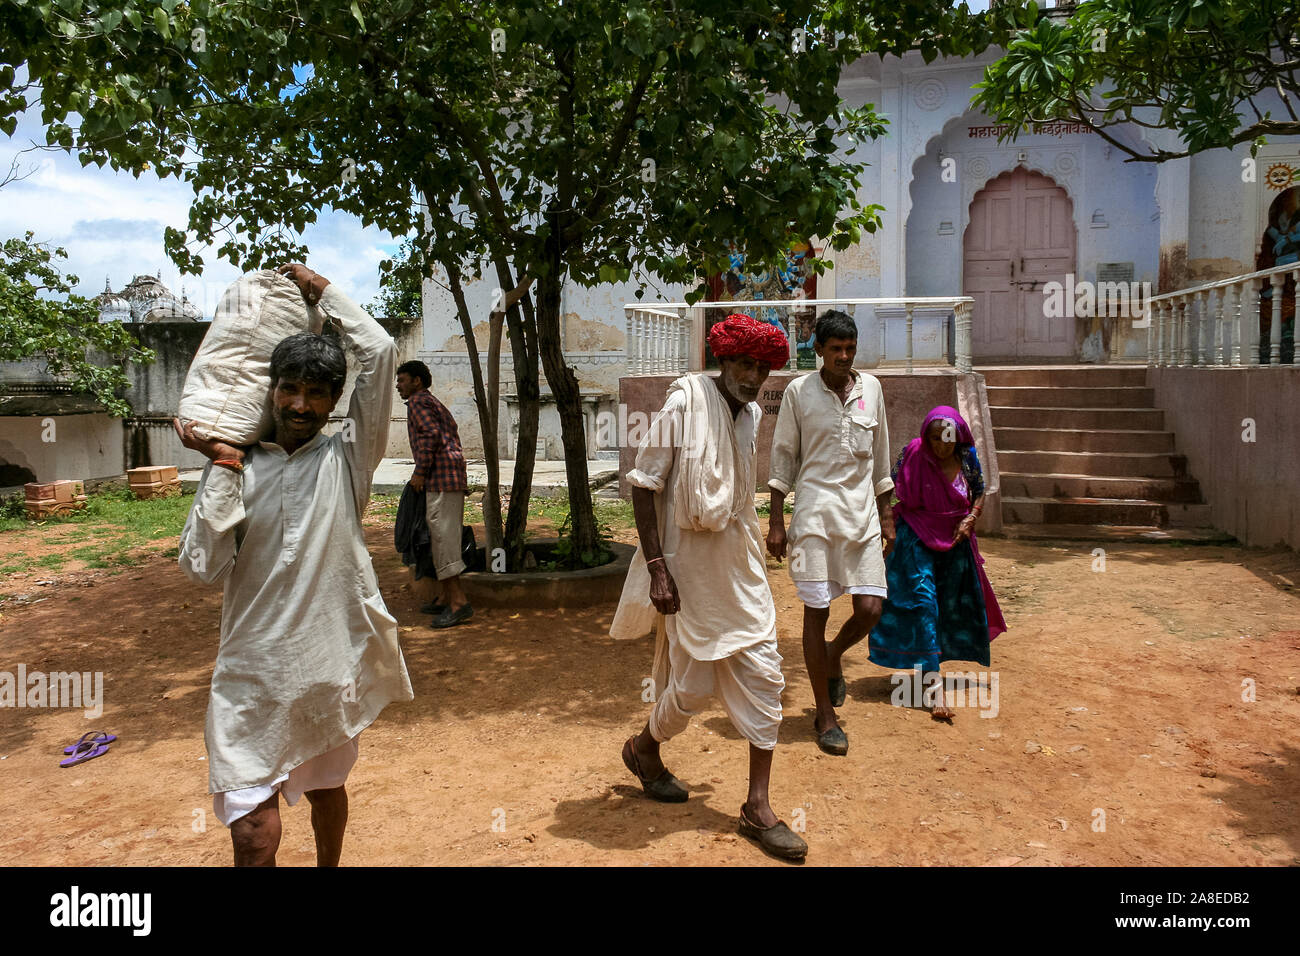 Pushkar, Rajasthan, India: a group of Indian men and women cross a courtyard Stock Photo